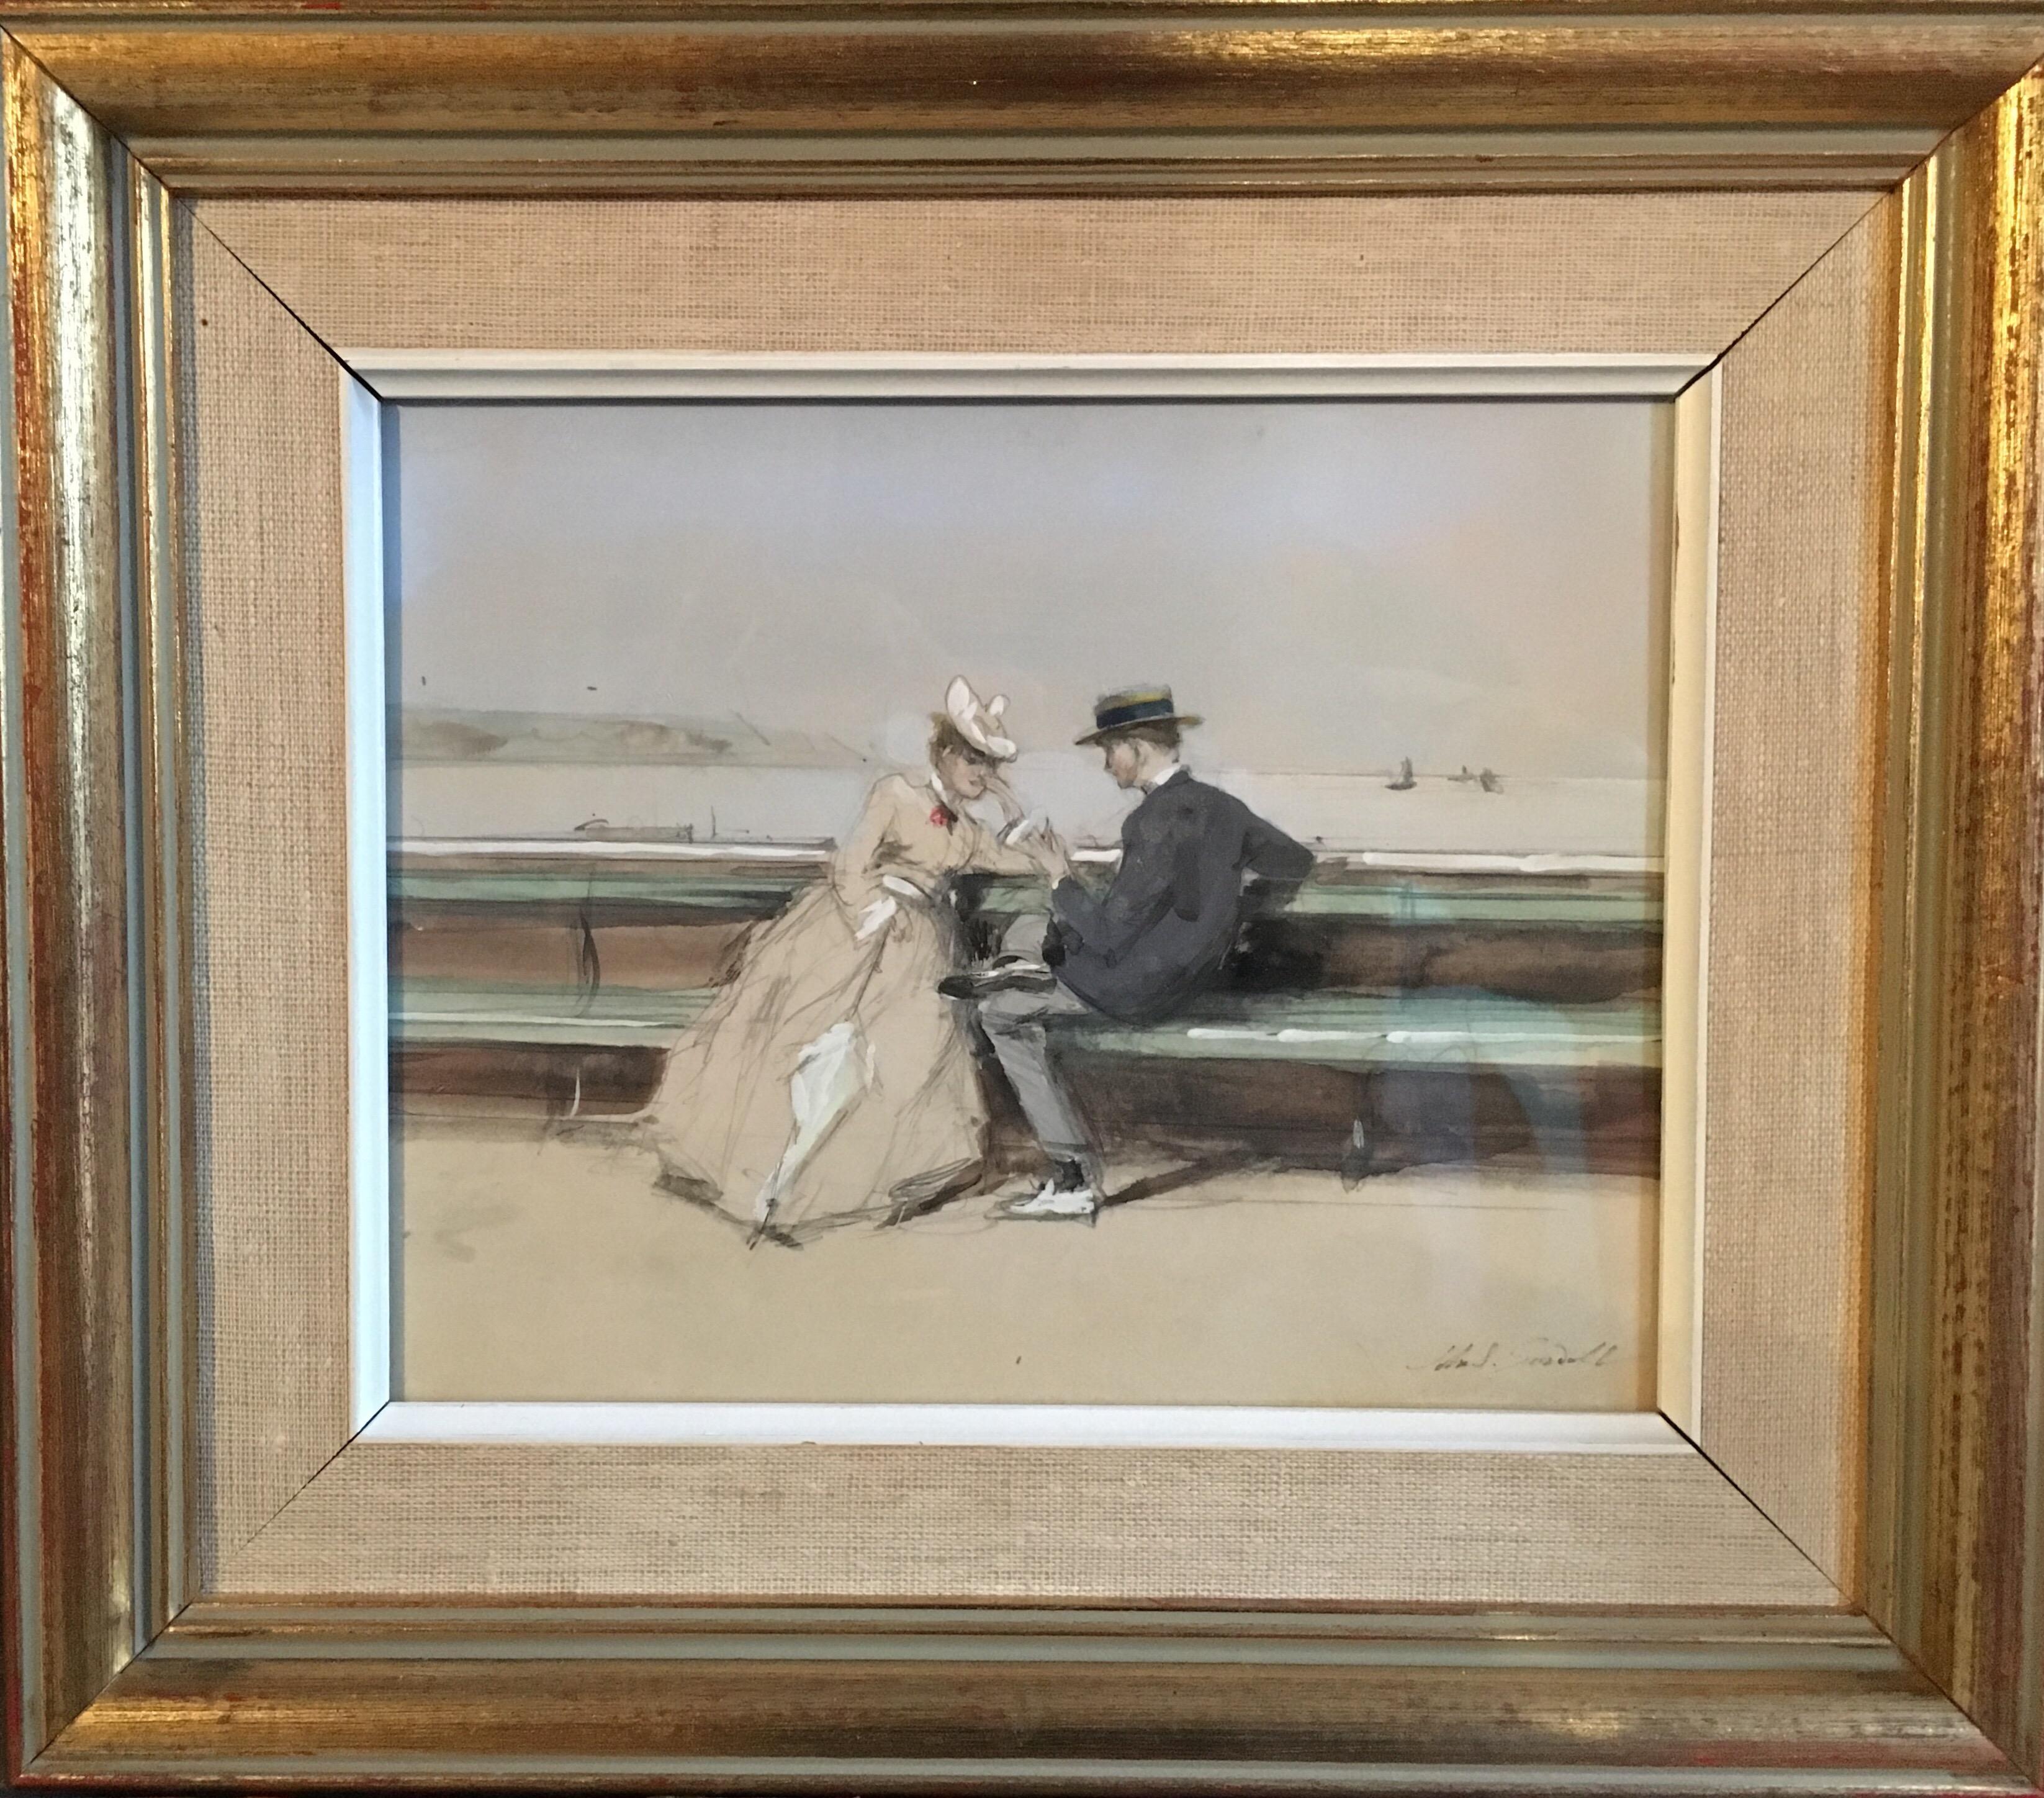 John Strickland Goodall Figurative Painting - The Marriage Proposal, Impressionist Original "The Important Question", Signed